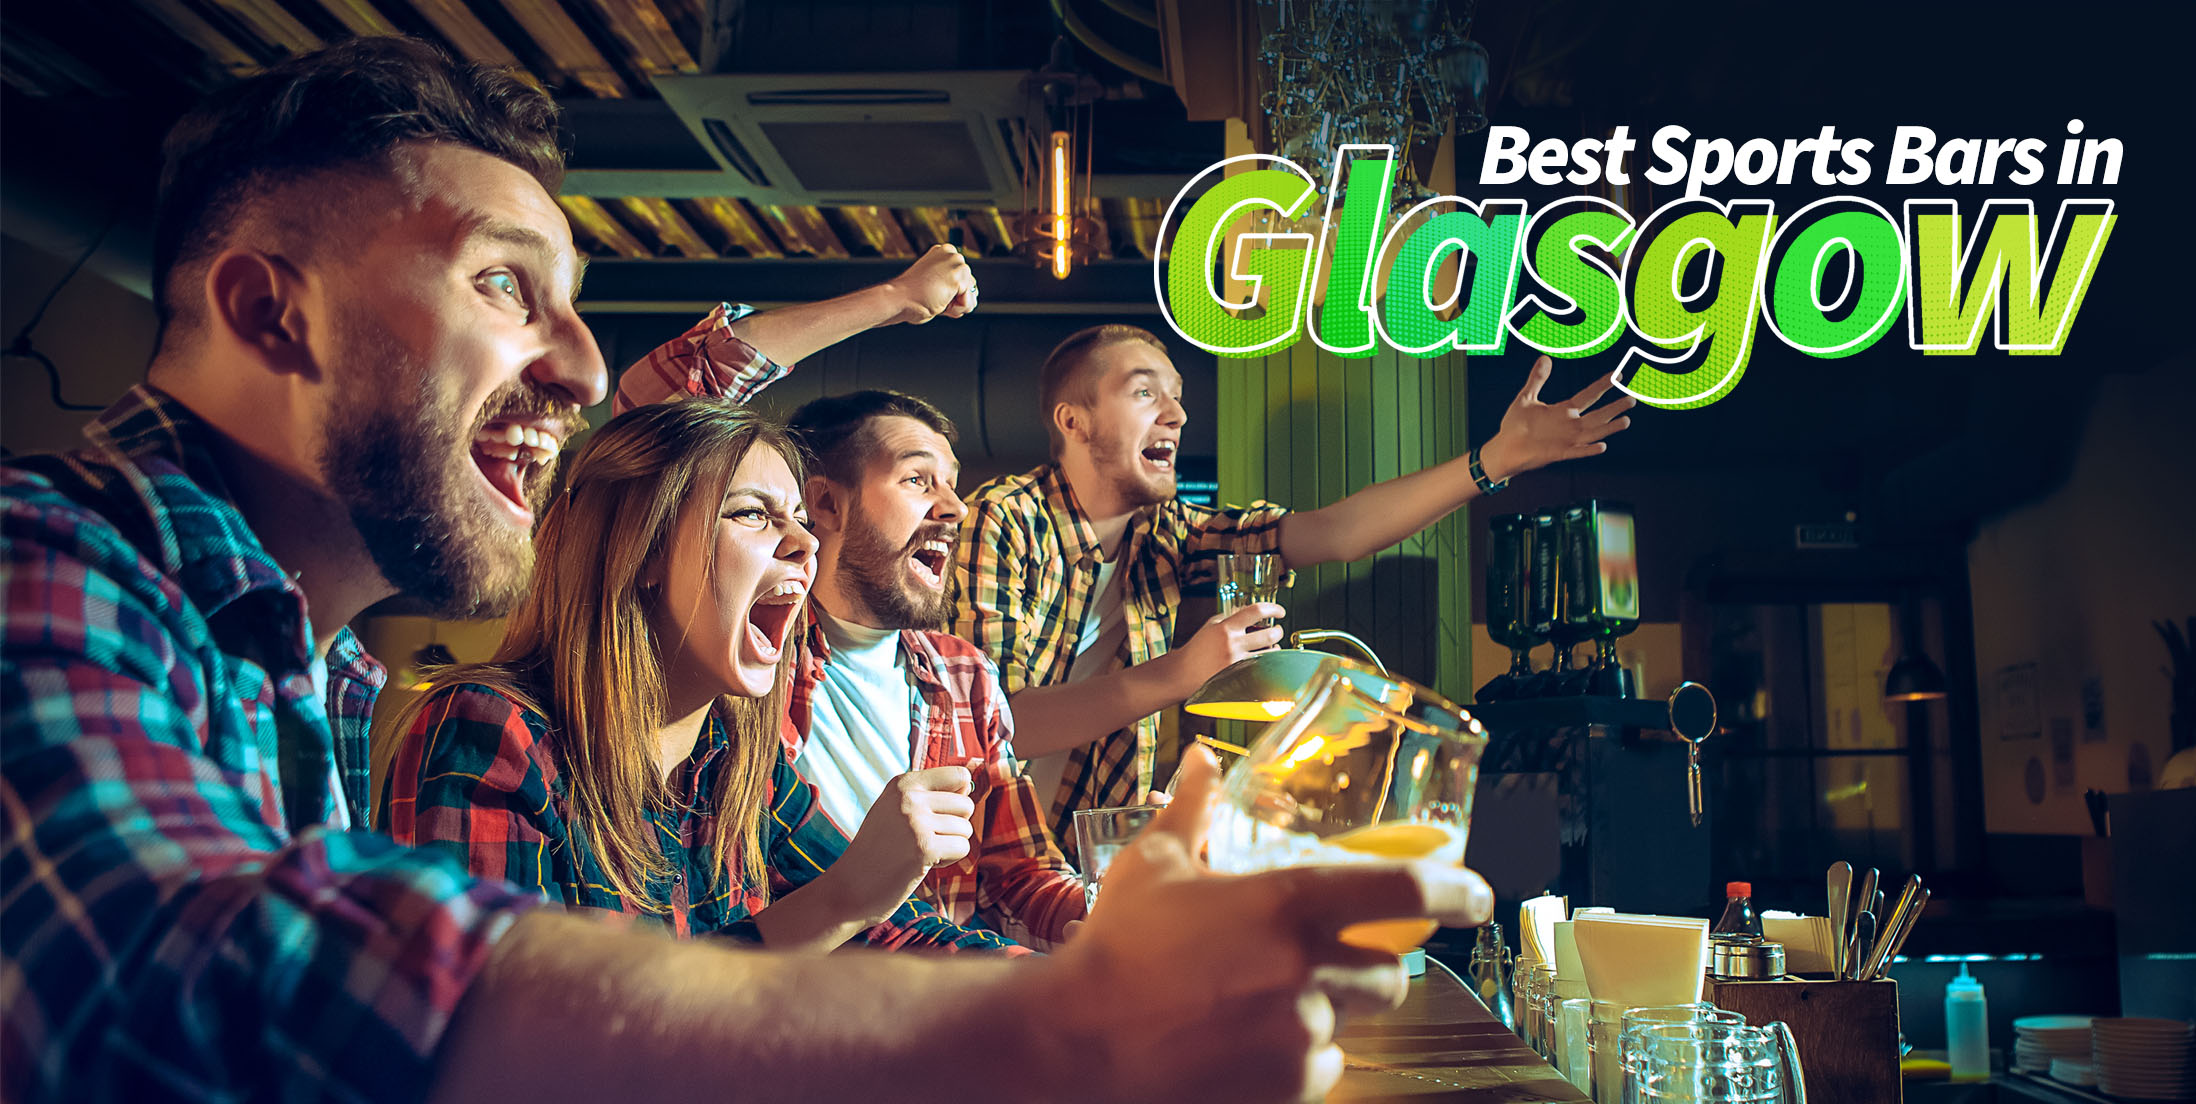 Top 10 Sports Bars in Glasgow